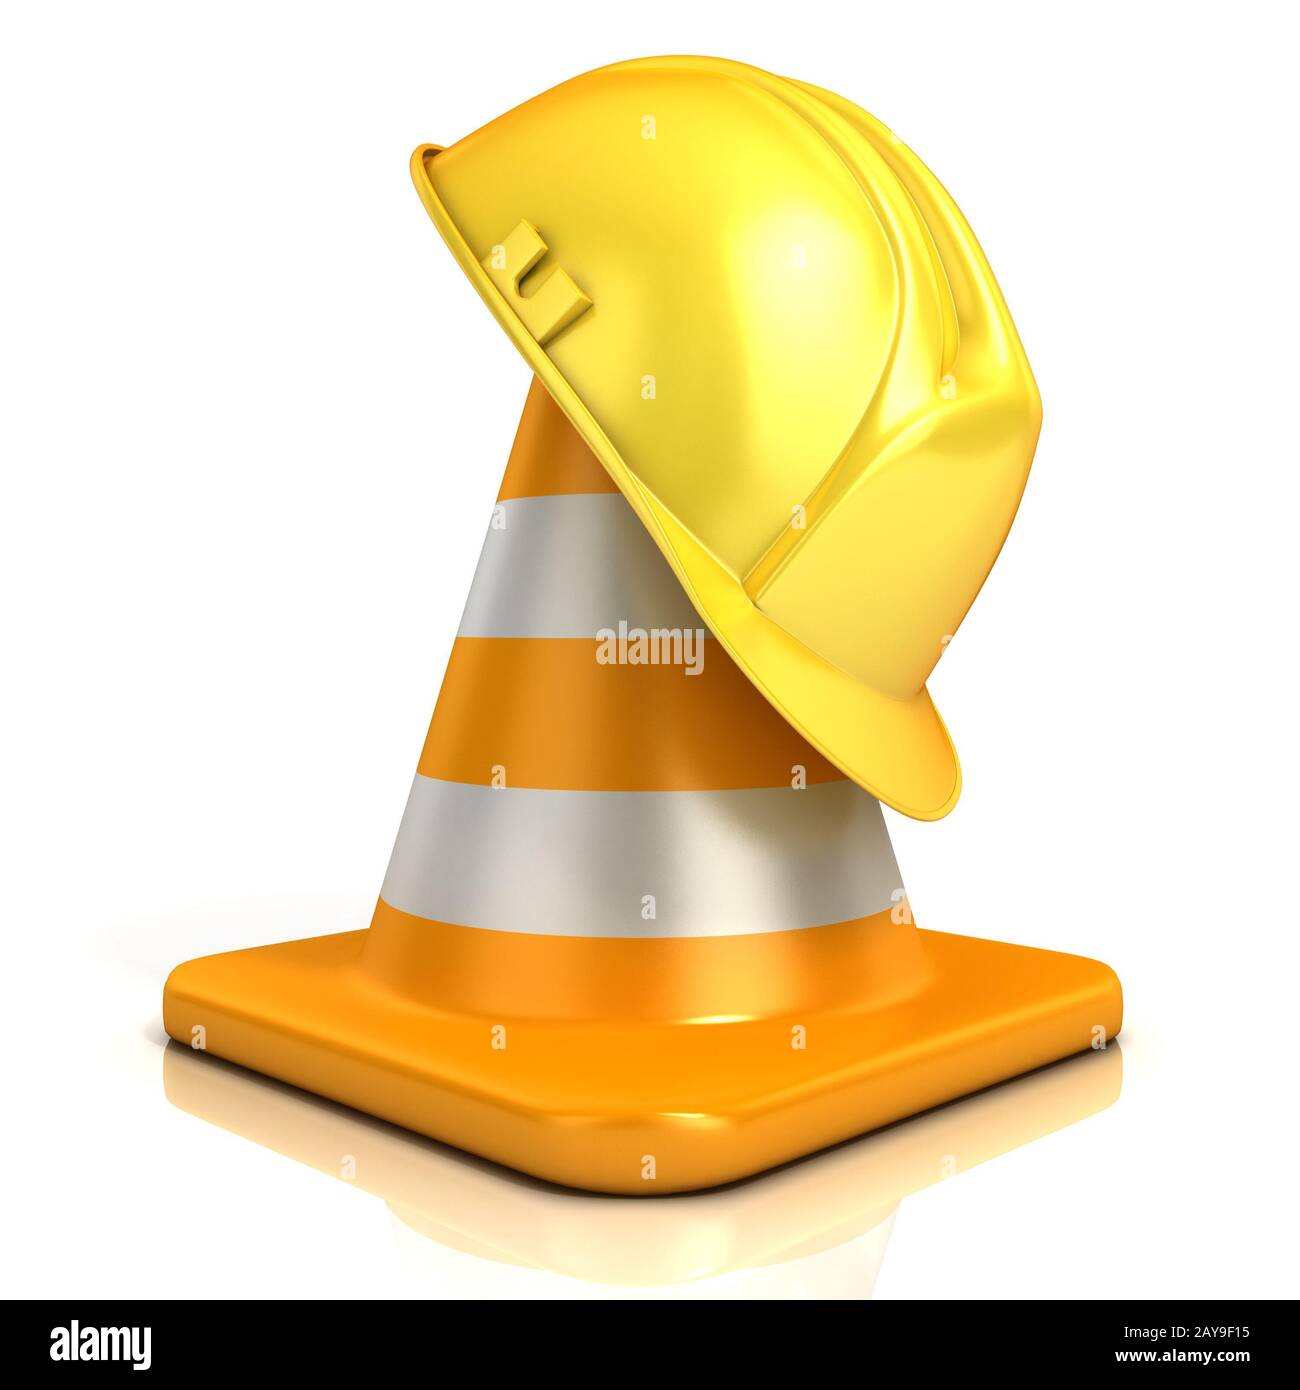 Traffic cone and safety helmet Stock Photo - Alamy